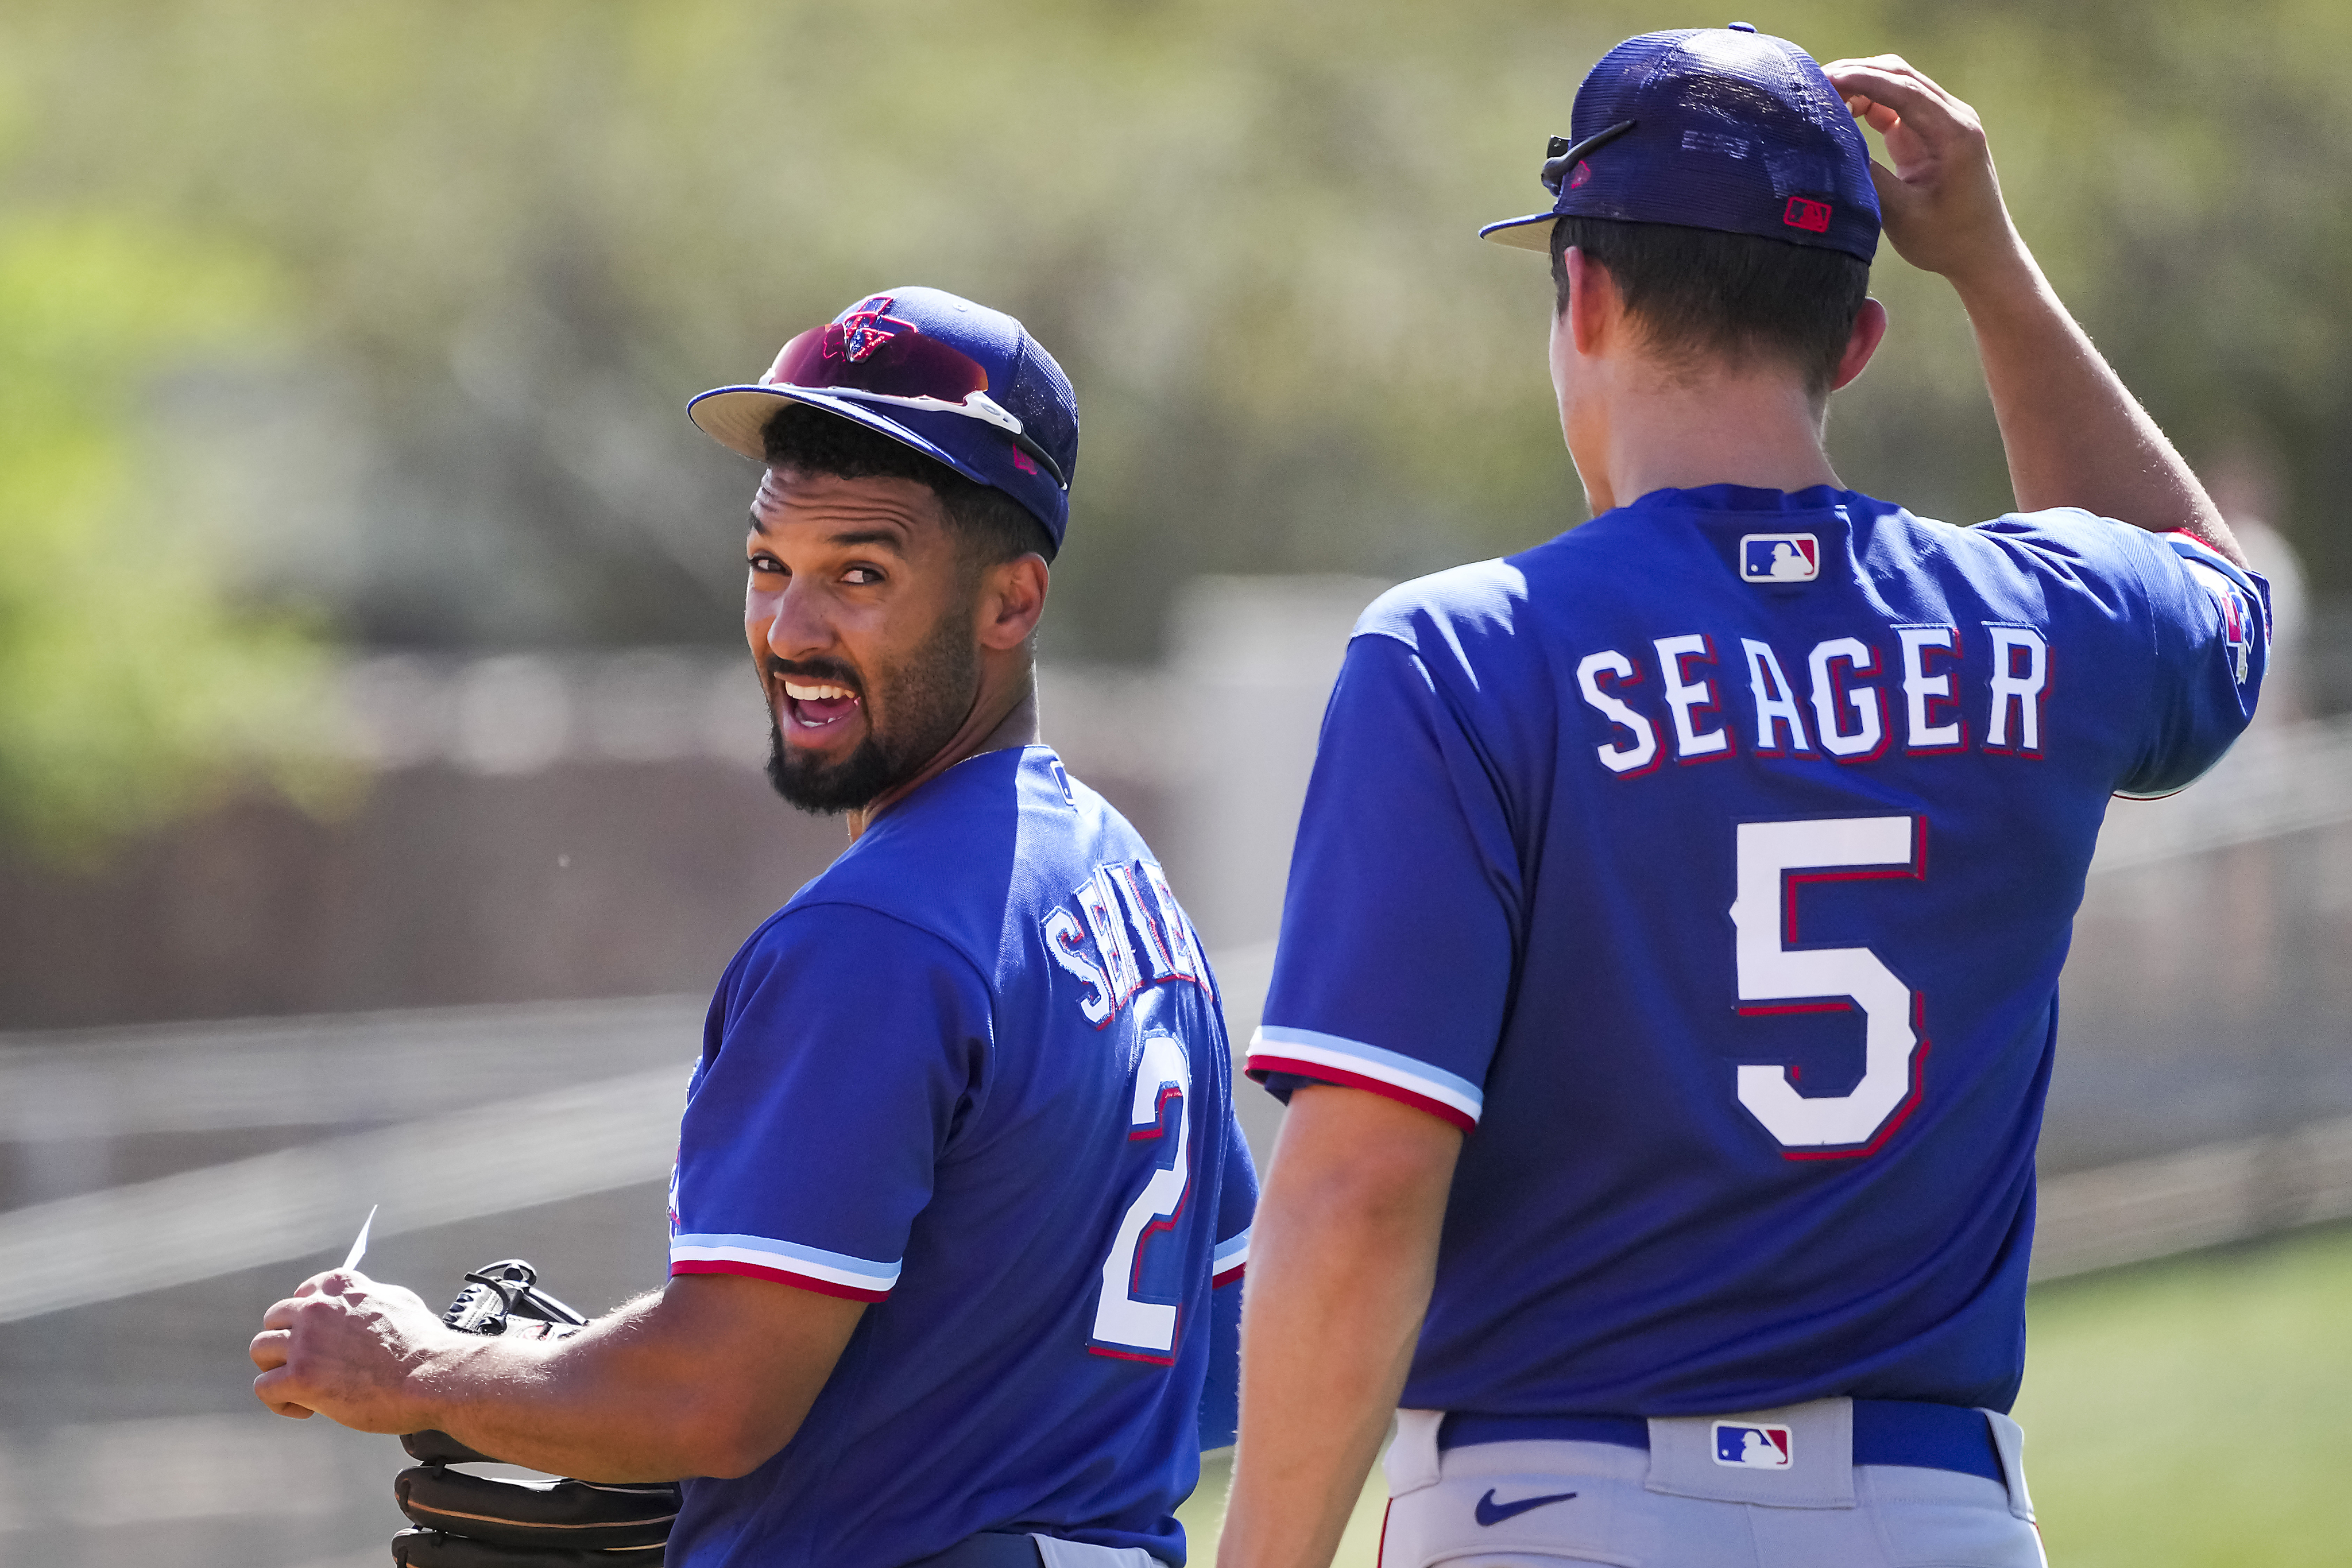 Rangers' investment in Marcus Semien and Corey Seager paying big dividends  National News - Bally Sports